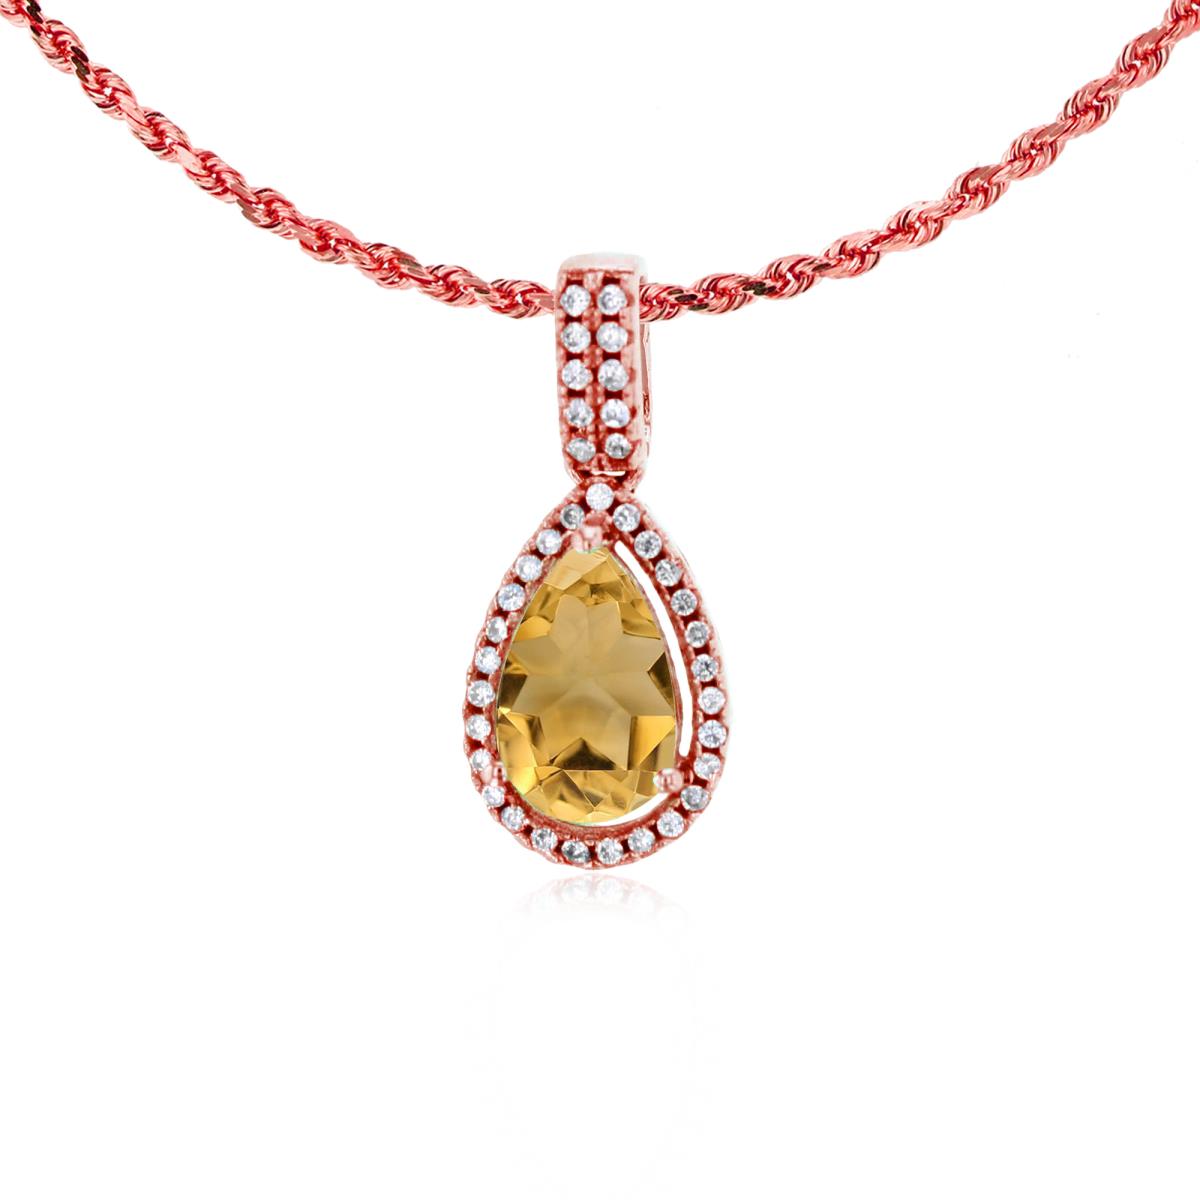 10K Rose Gold 8x5mm Pear Cut Citrine & 0.11 CTTW Diamond Halo 18" Rope Chain Necklace